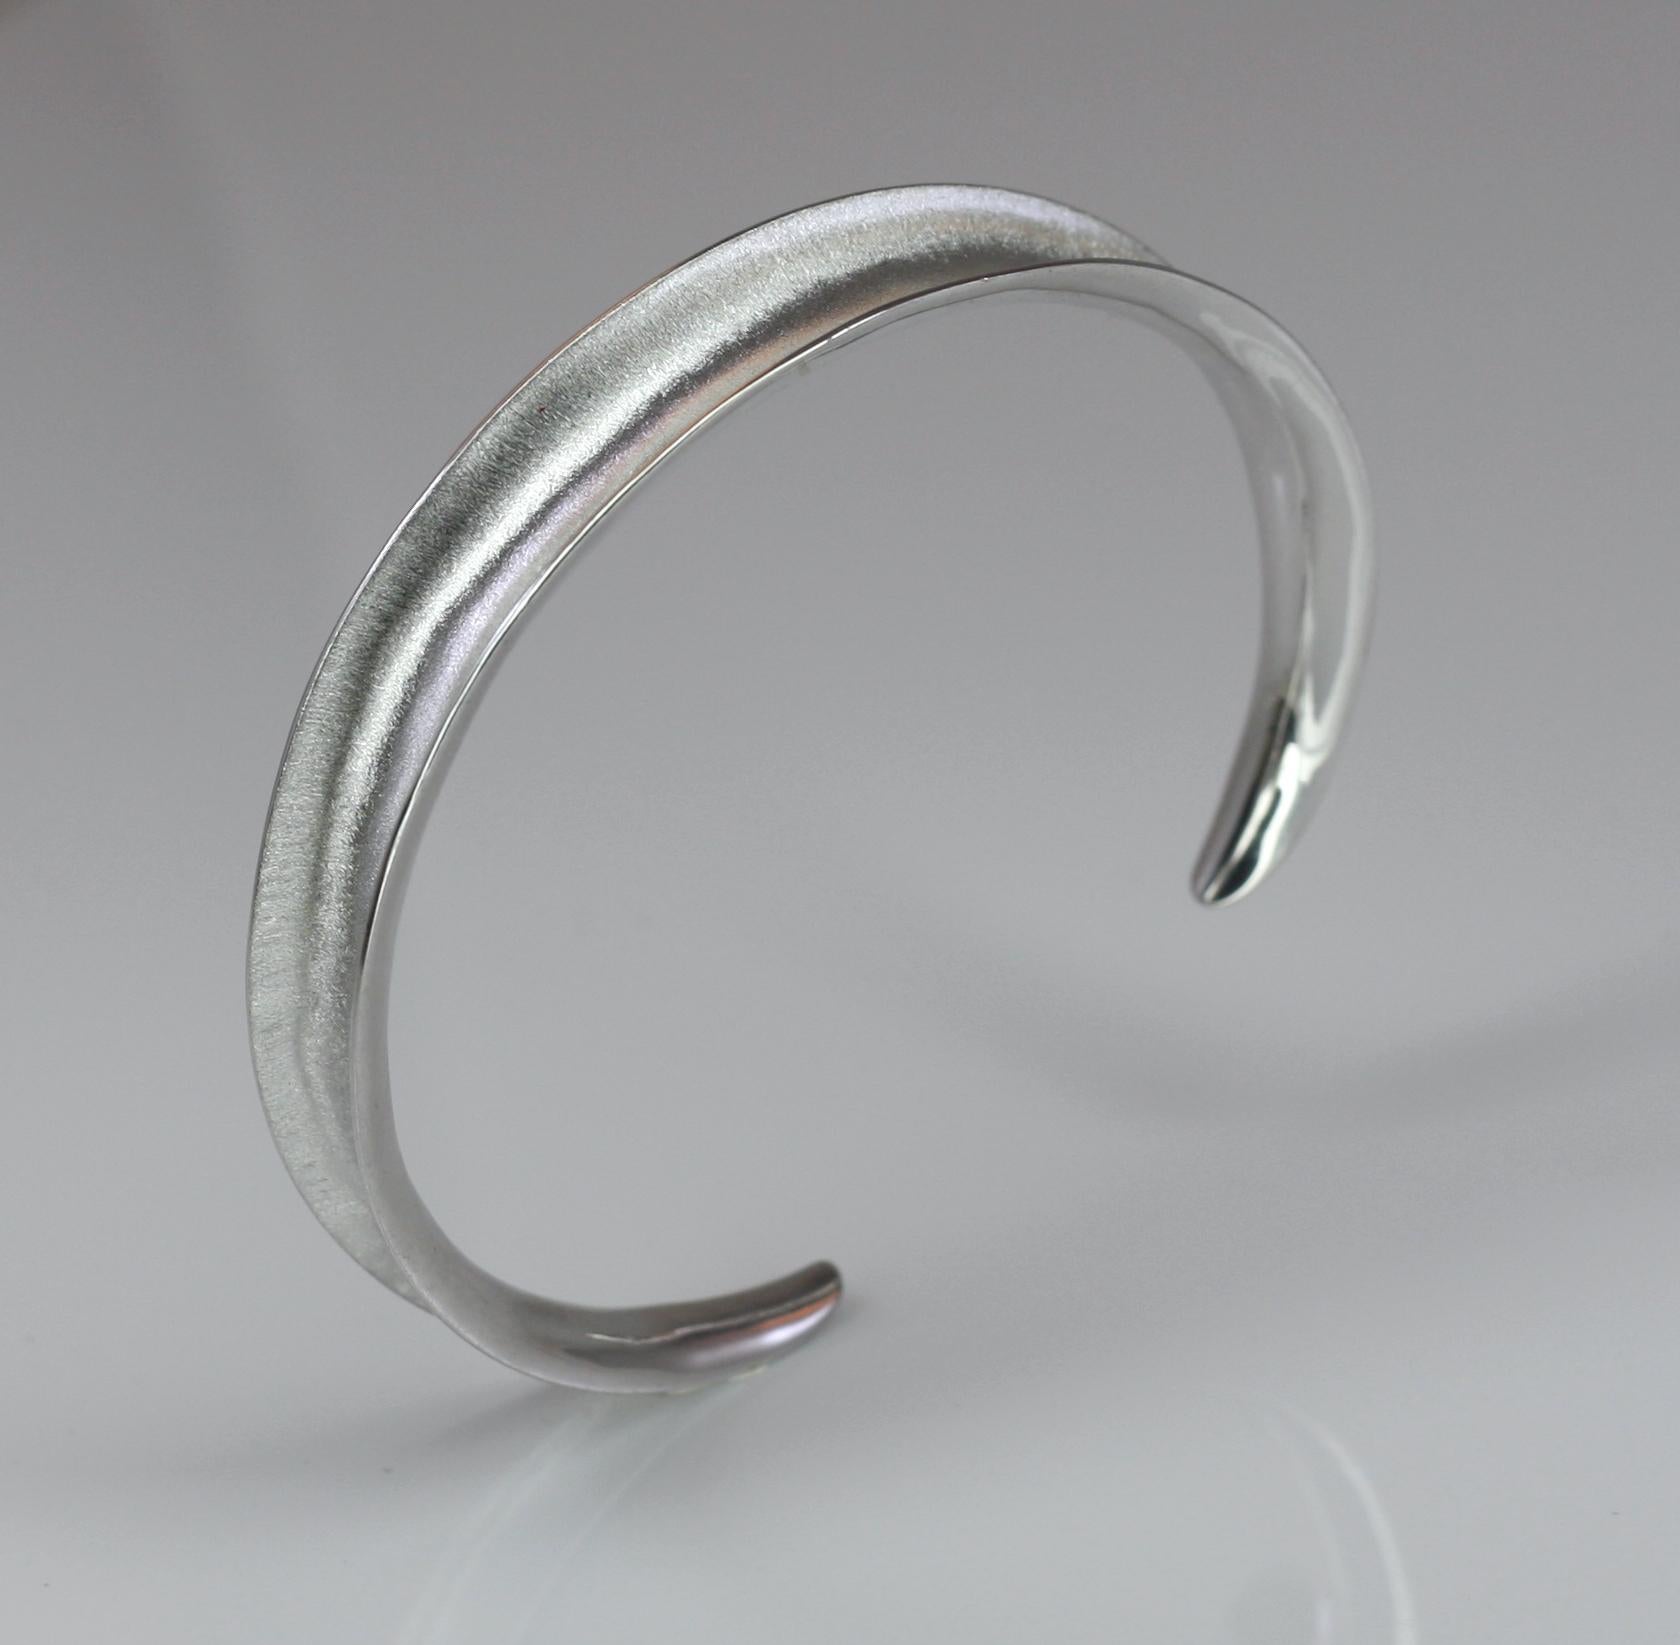 Contemporary Yianni Creations Fine Silver and Palladium Bangle Bracelet For Sale